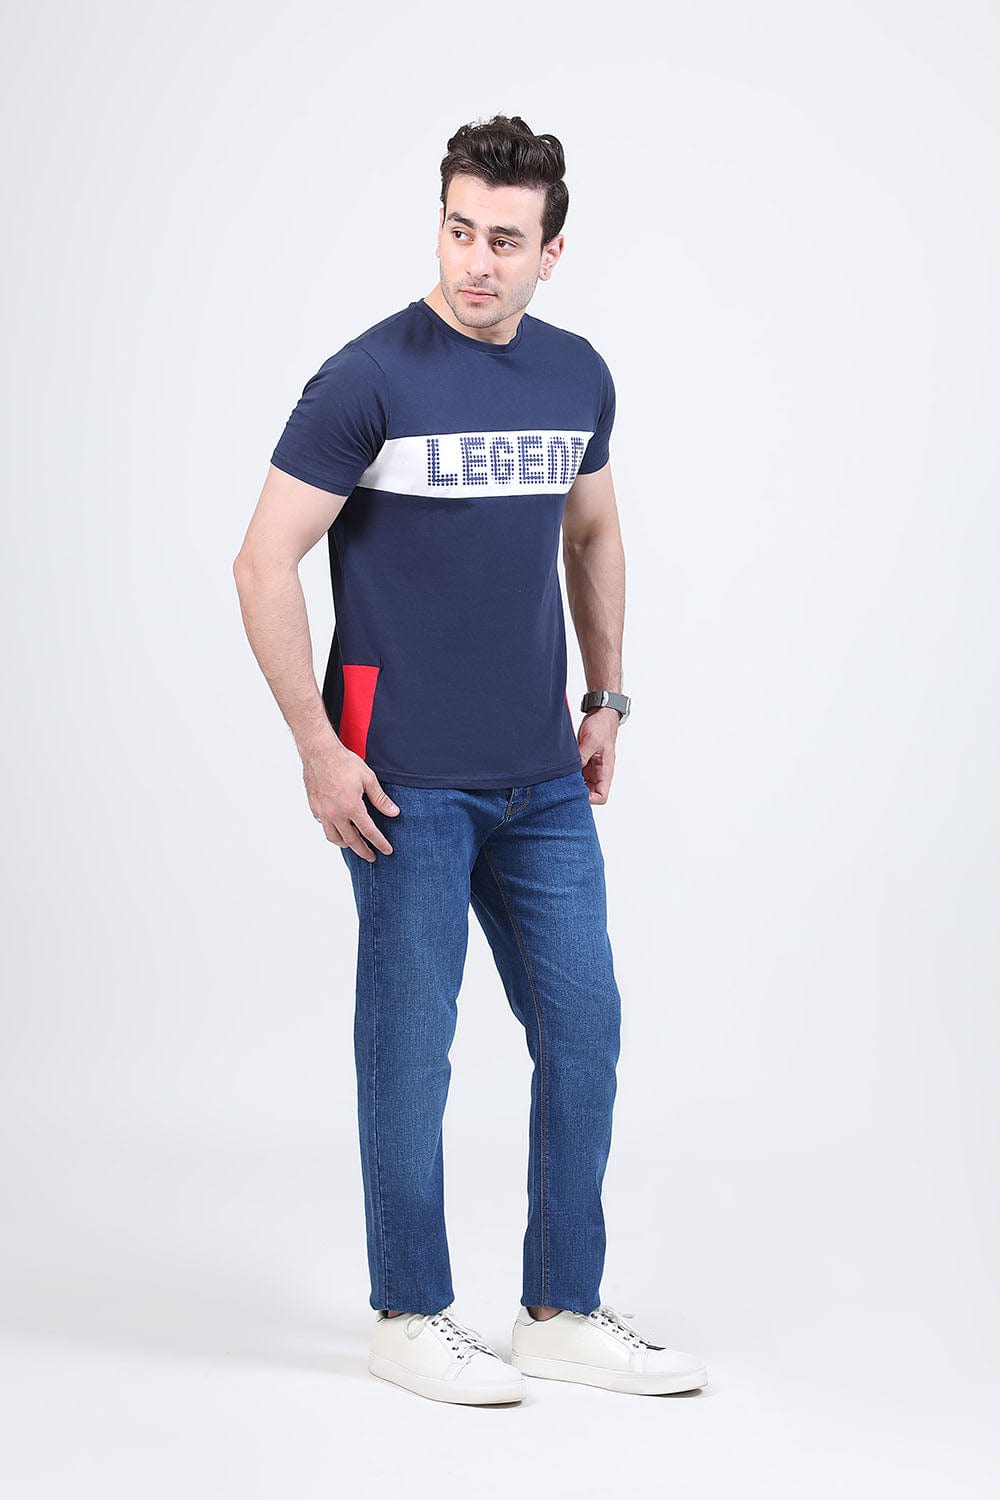 Hope Not Out by Shahid Afridi Men T-Shirt Legend Navy Half Sleeve Tee: Graphic Print